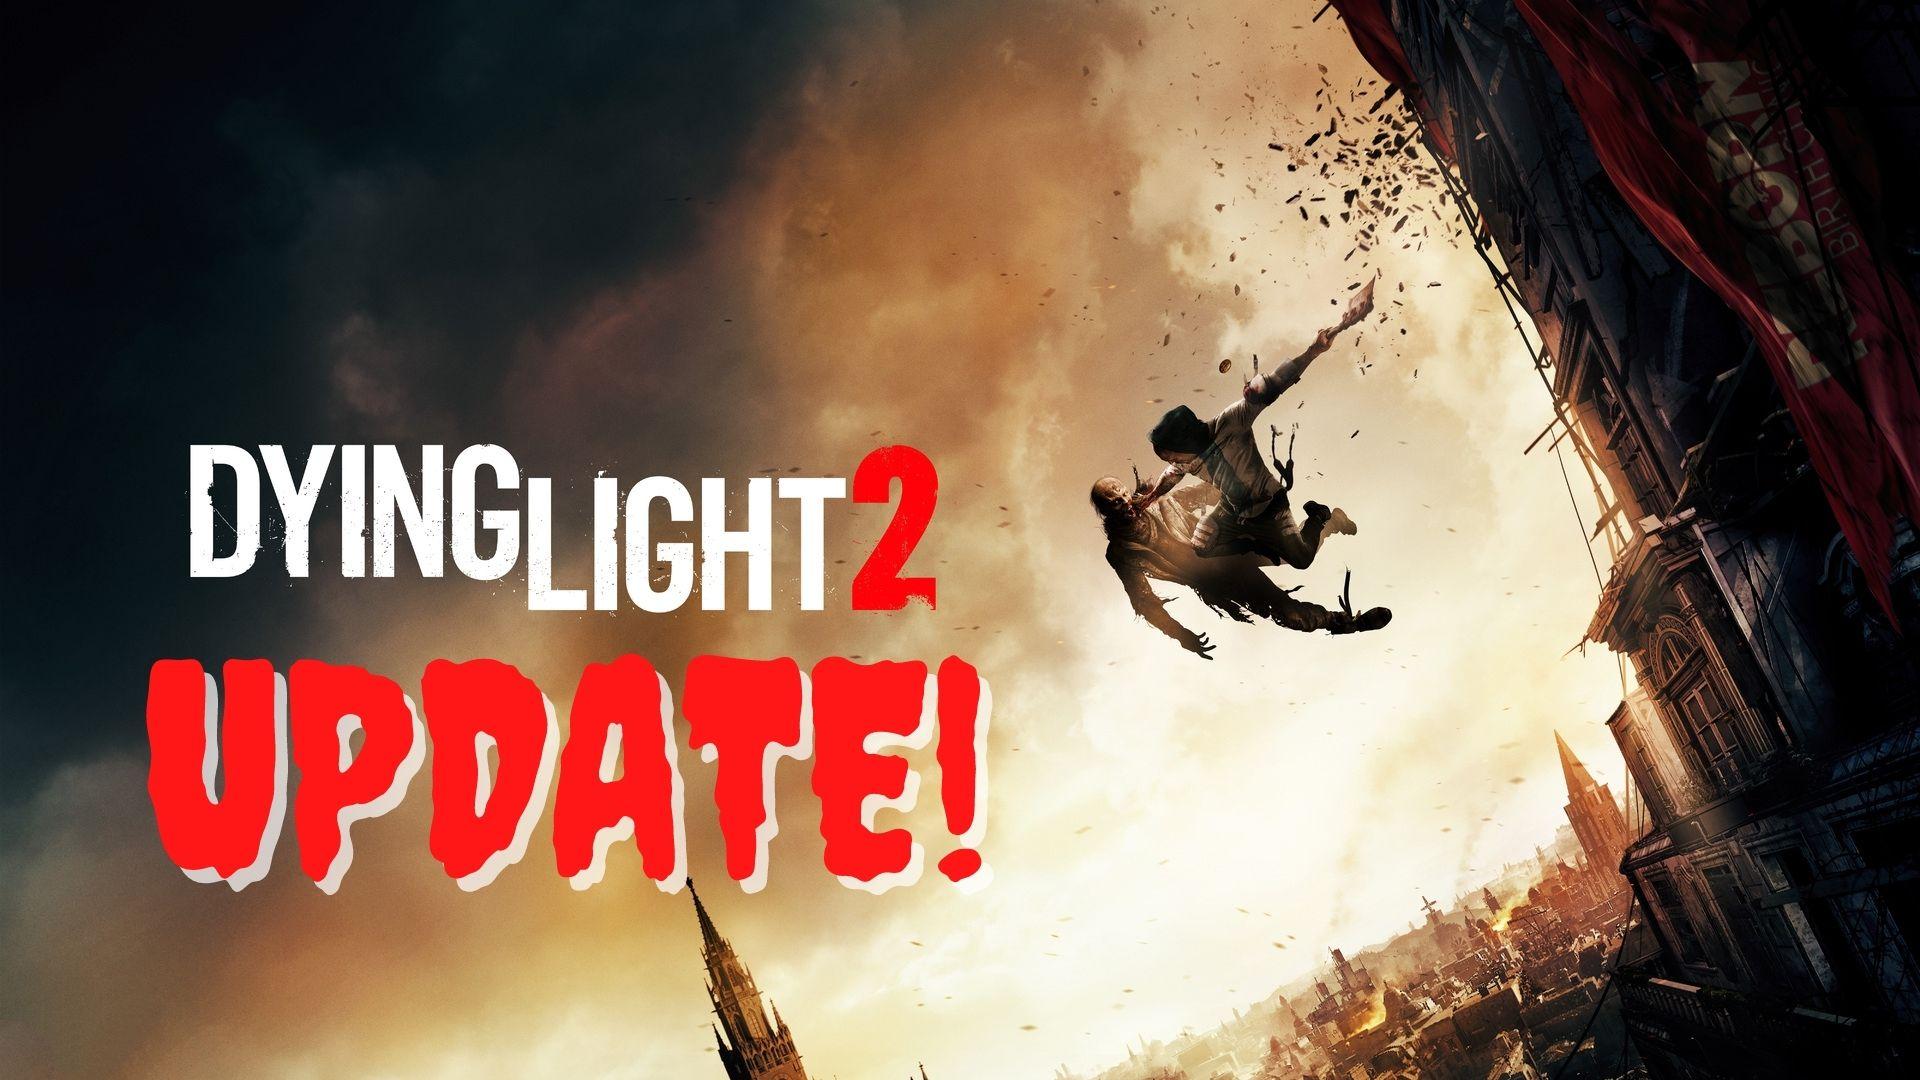 Dying Light 2 Update, New Is Strange Game and More – Upcoming Games [March